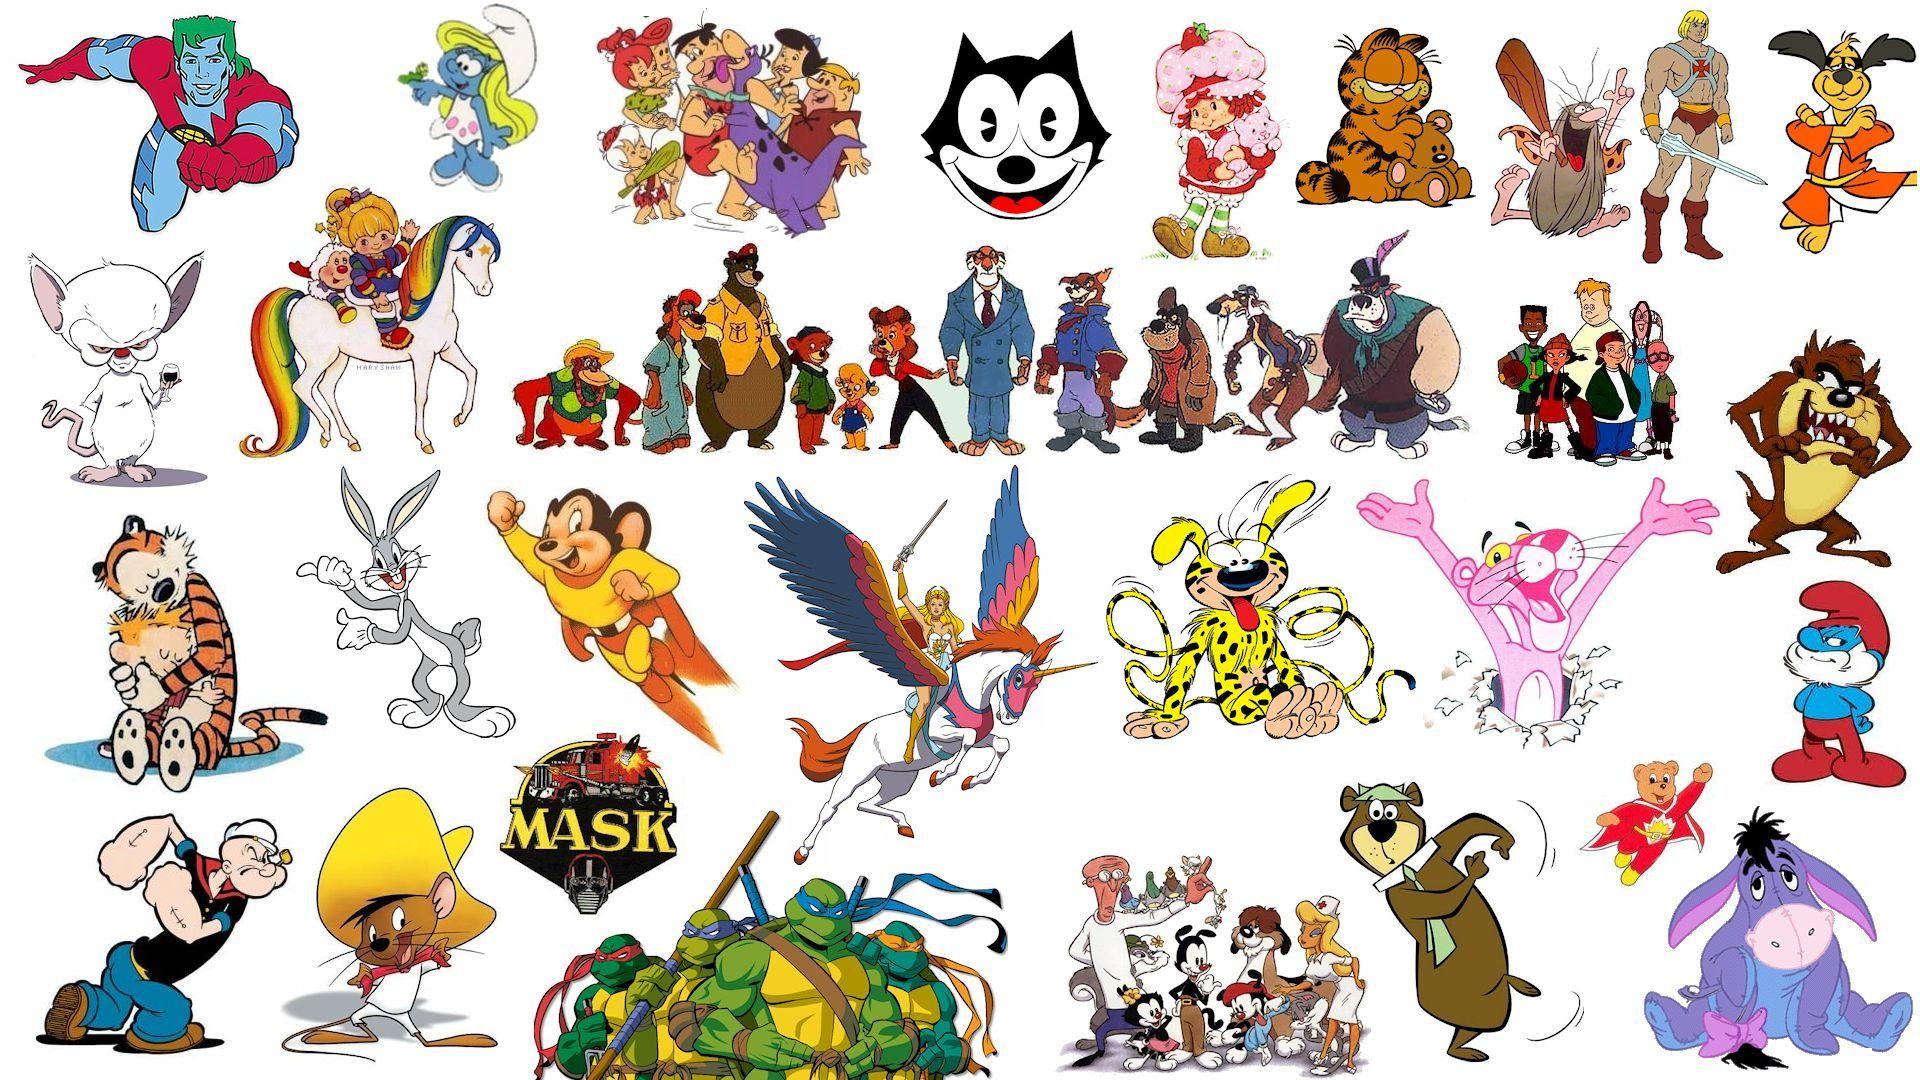 WHO REMEMBERS THESE AMAZING GAMES? - - The Old Cartoons